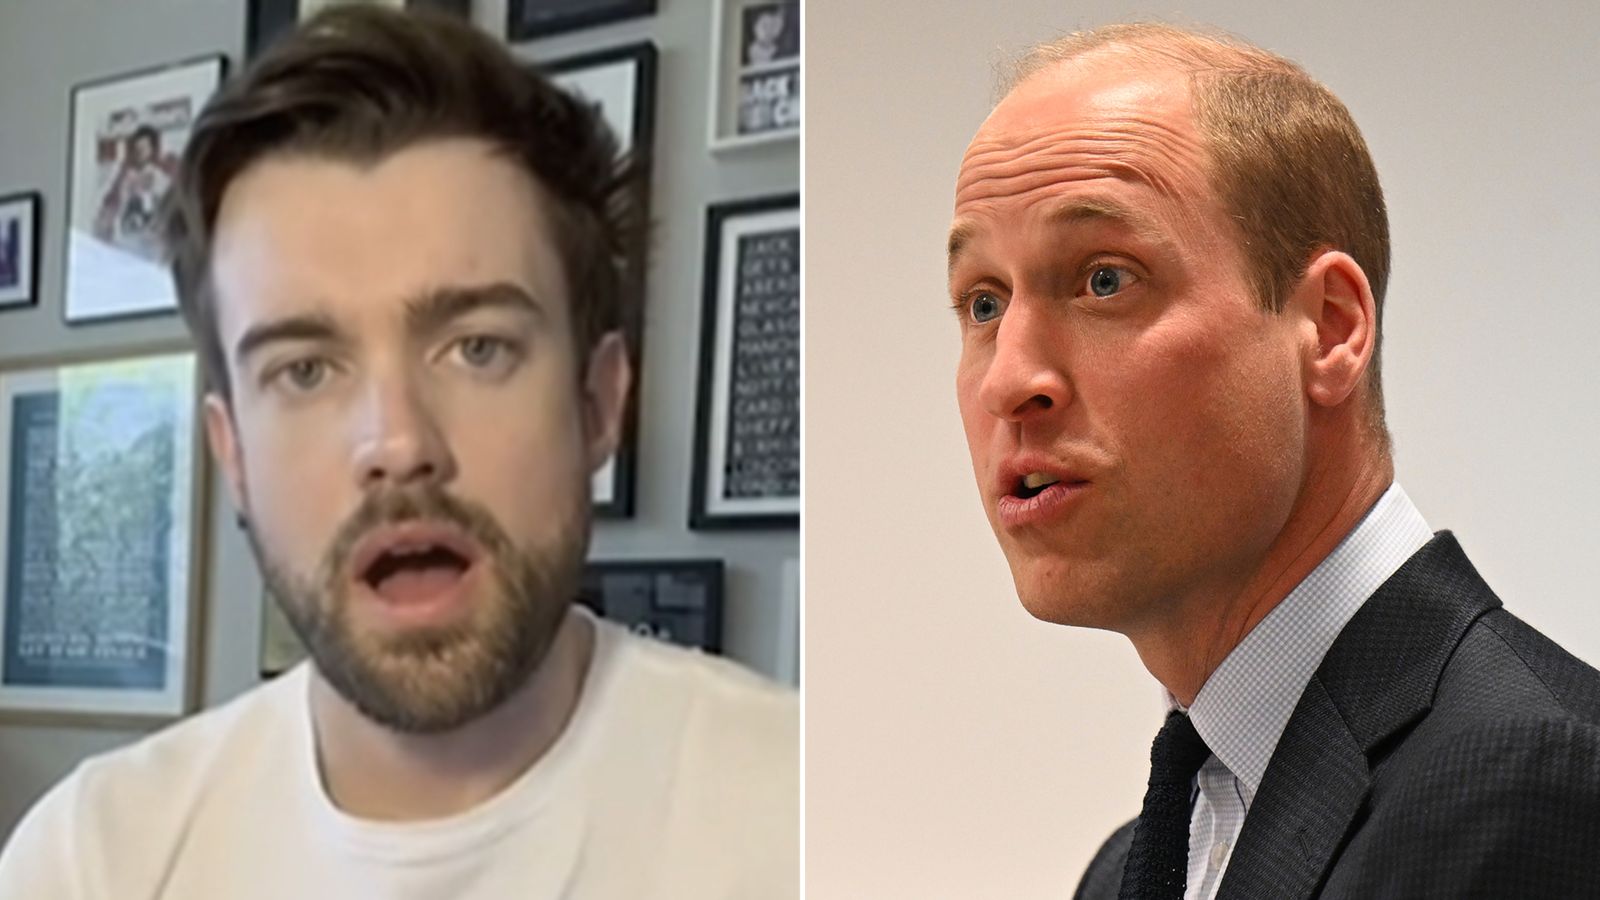 Jack Whitehall reacts after Prince William calls his jokes 'dad-like'